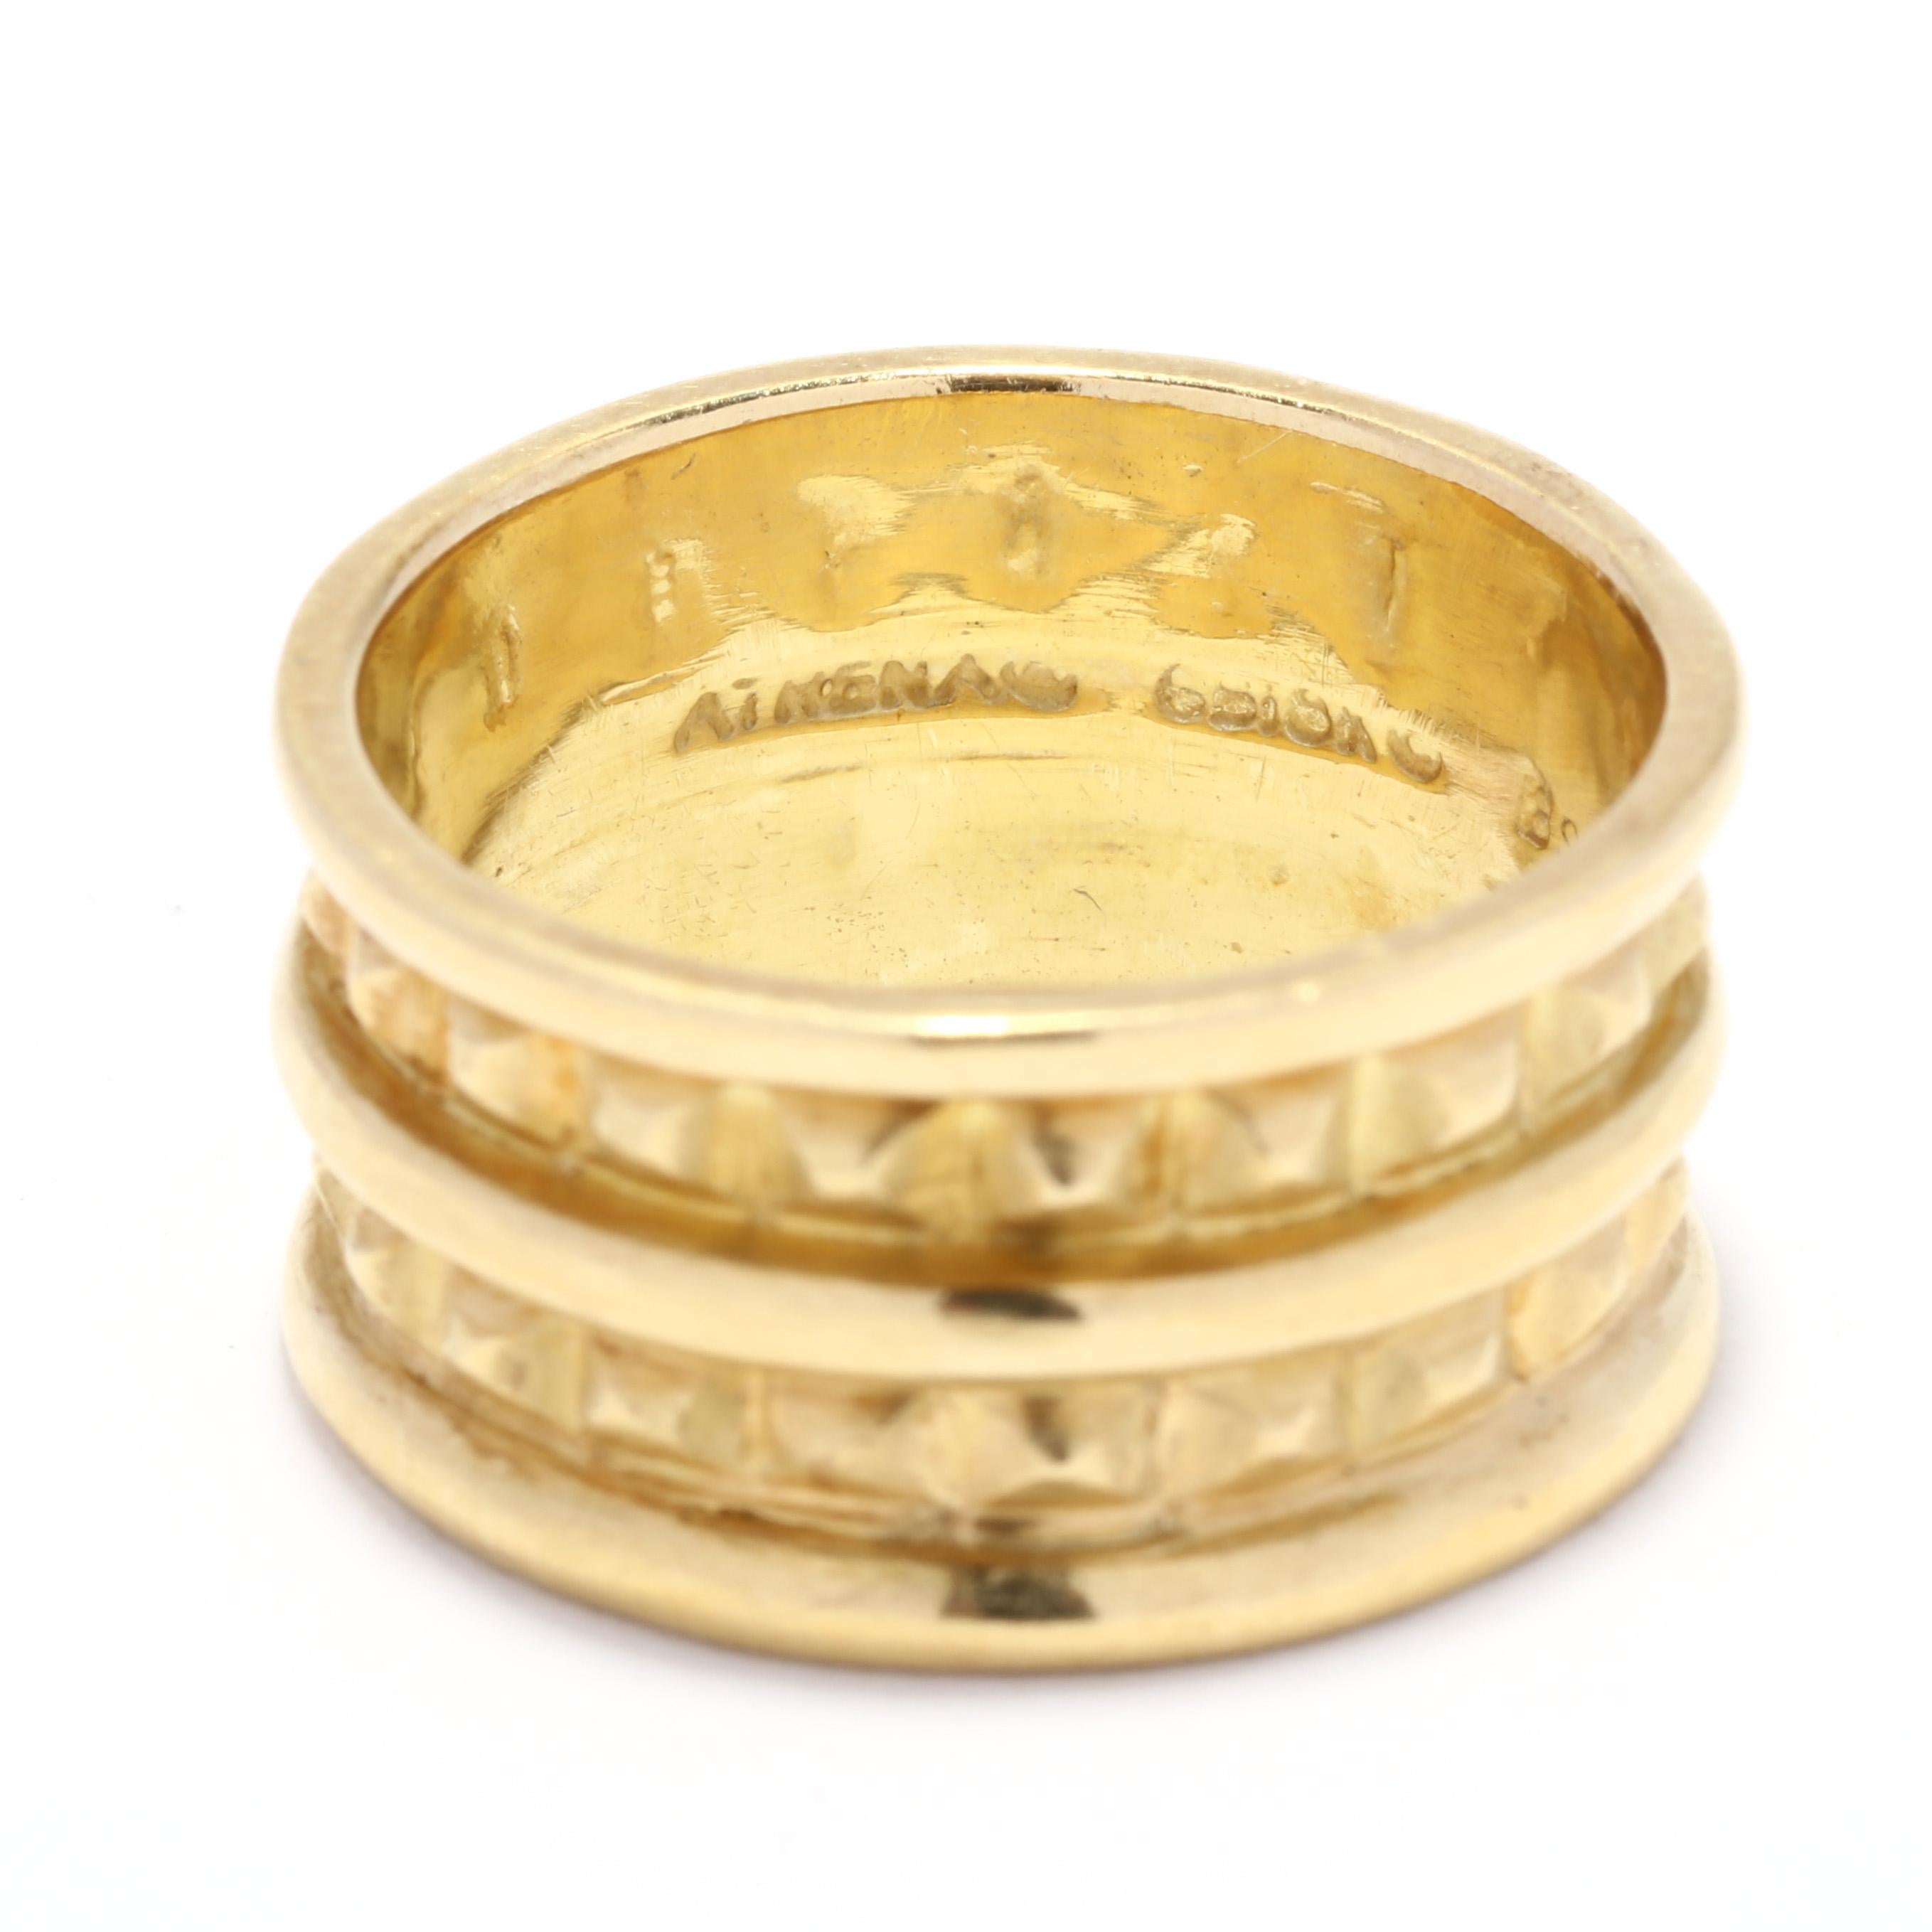 A vintage 18 karat yellow gold wide band designed by Black Star & Frost. This band features a double row of pyramids in an eternity design with polished rows in between and a slight textured detailing.

Ring Size 8.75

Width: 3/8 in.

Weight: 6.4